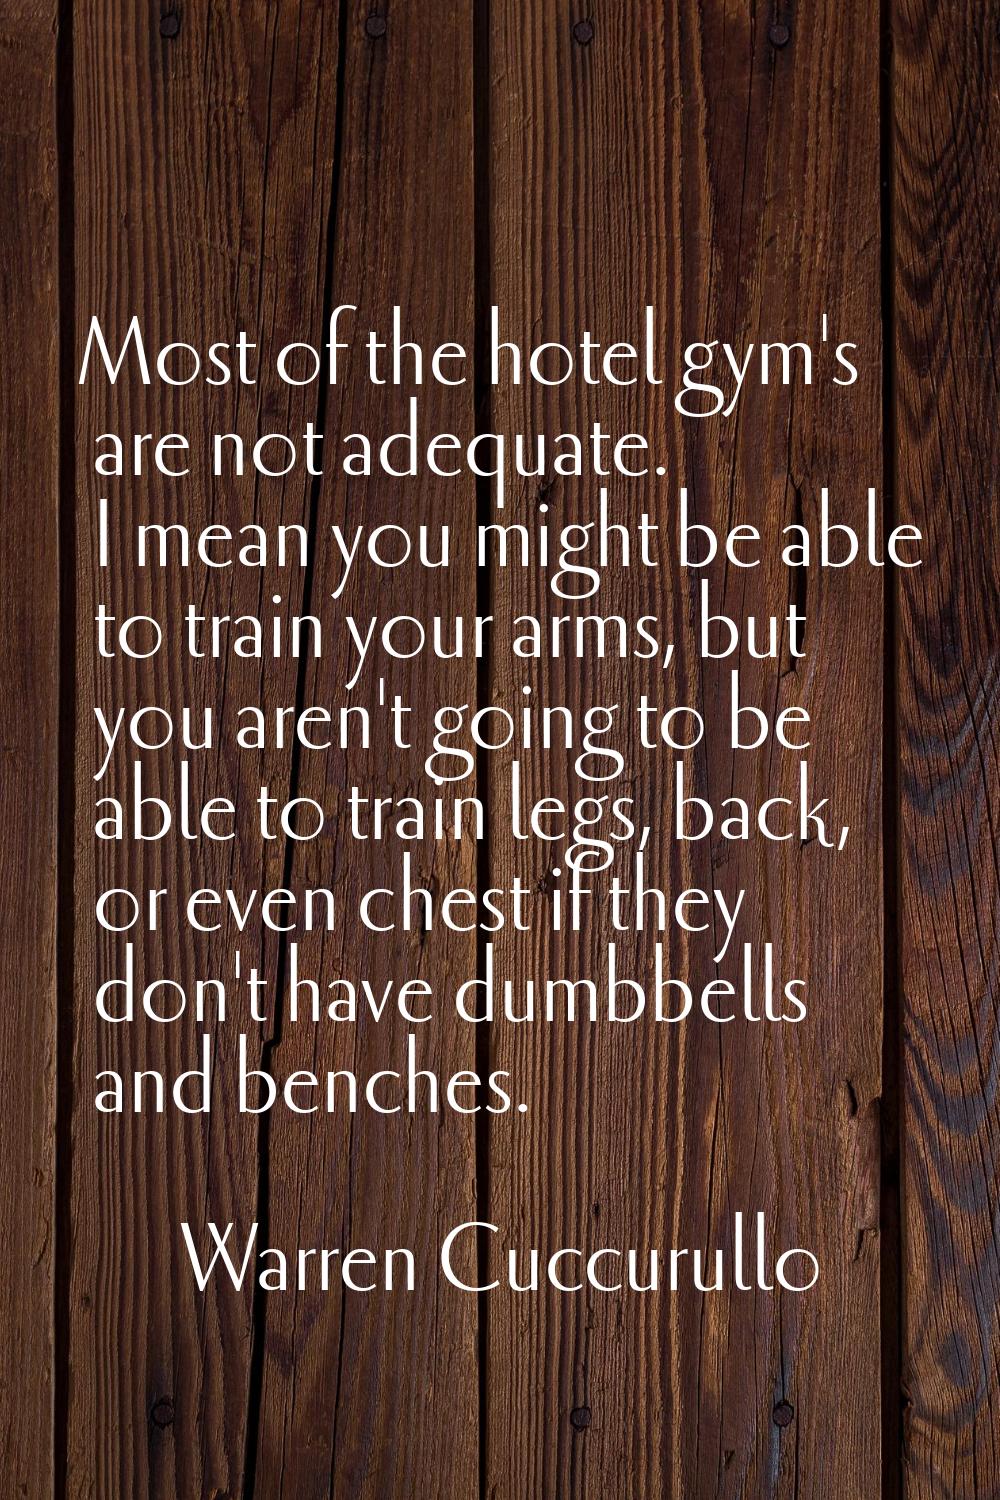 Most of the hotel gym's are not adequate. I mean you might be able to train your arms, but you aren